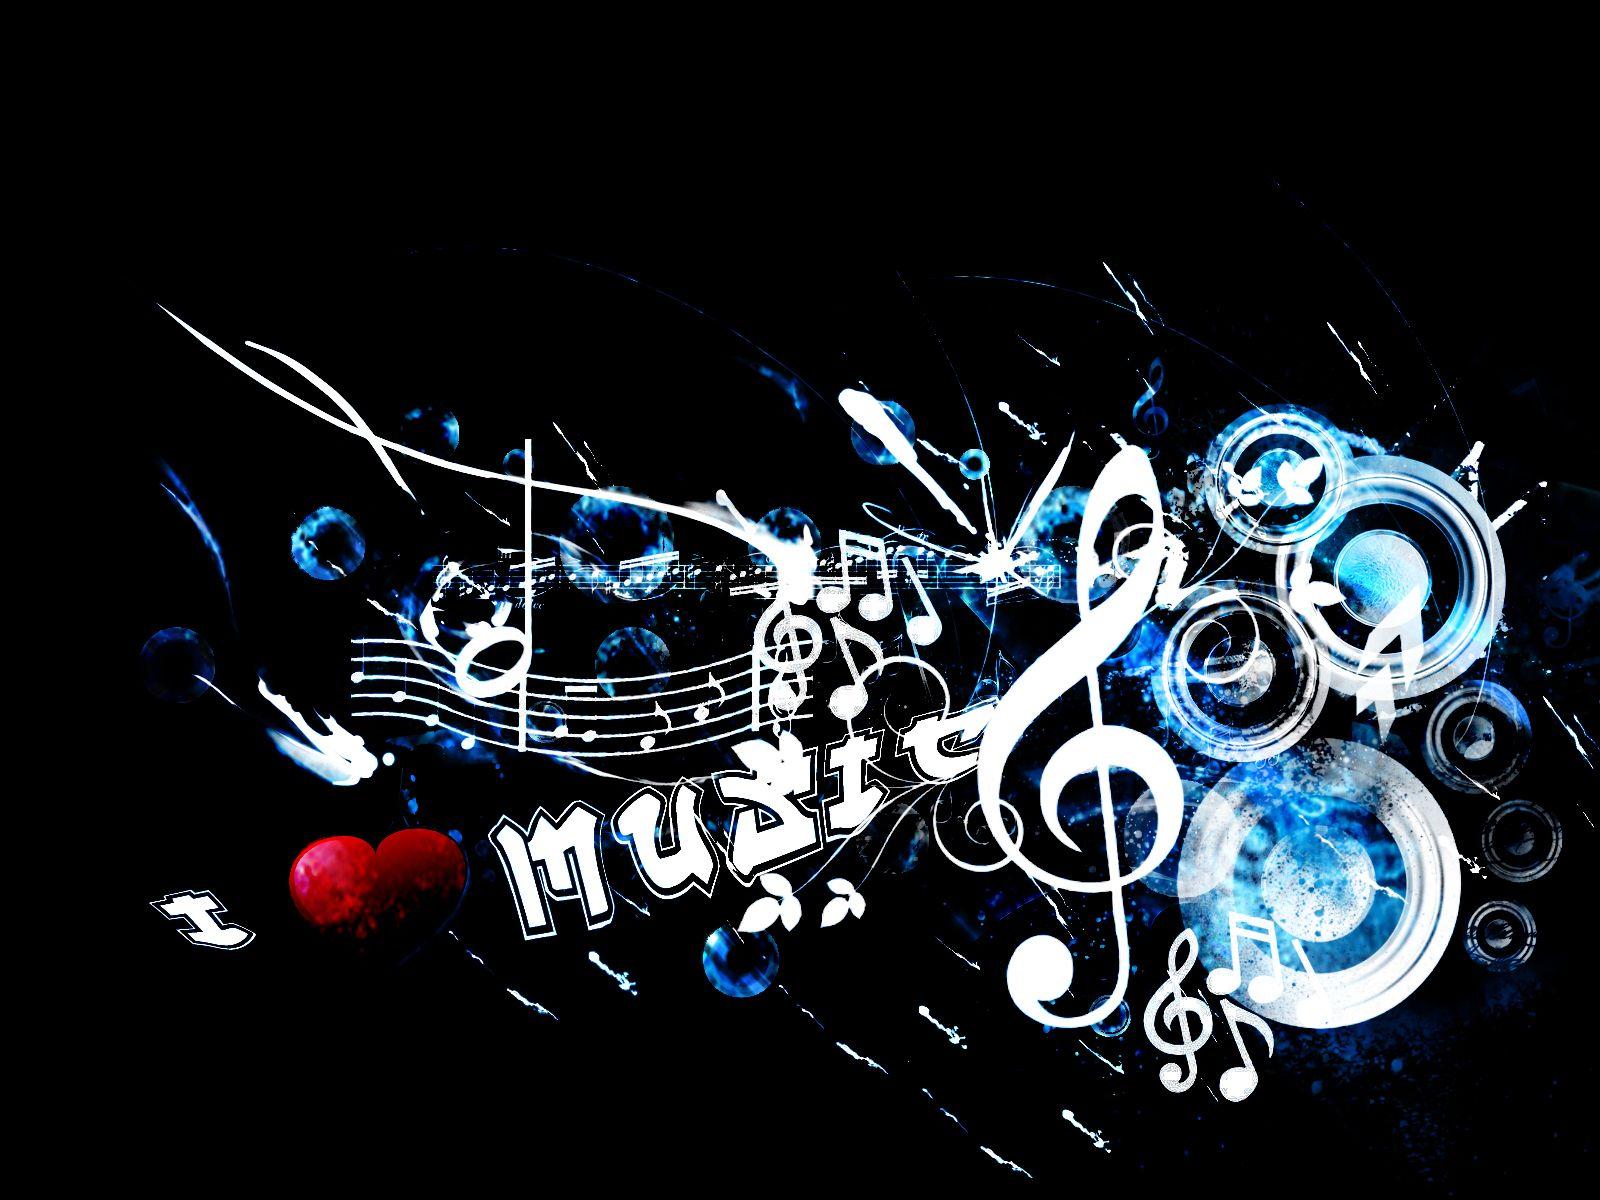 Wallpaper.wiki Love Music Art Abstract Black Background Image HD